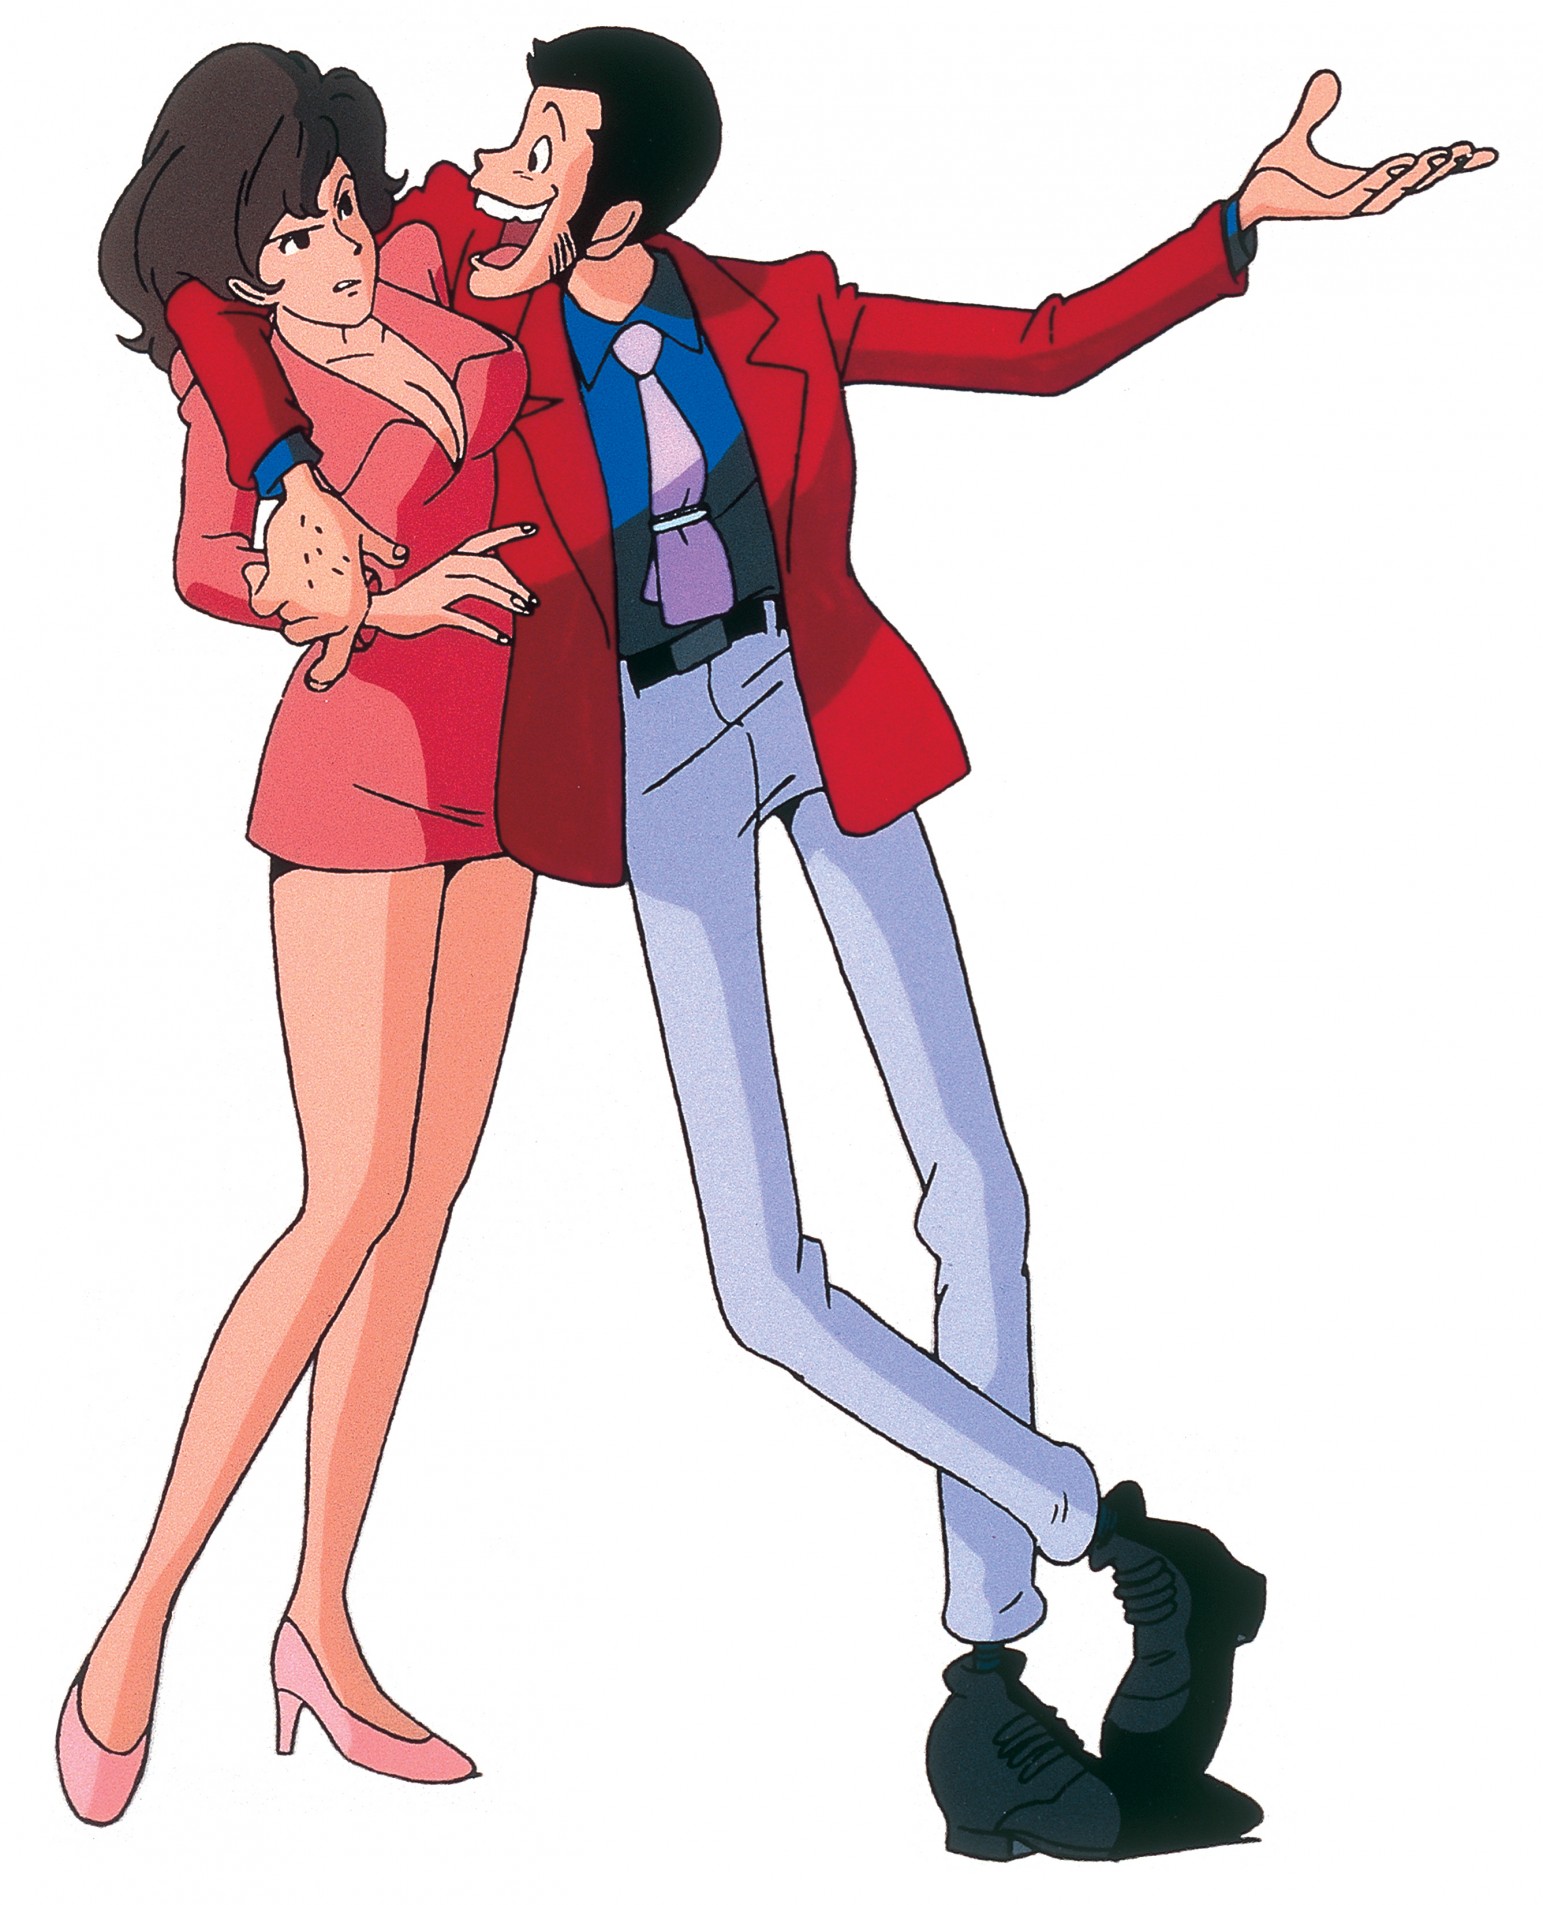 Lupin The Third #5